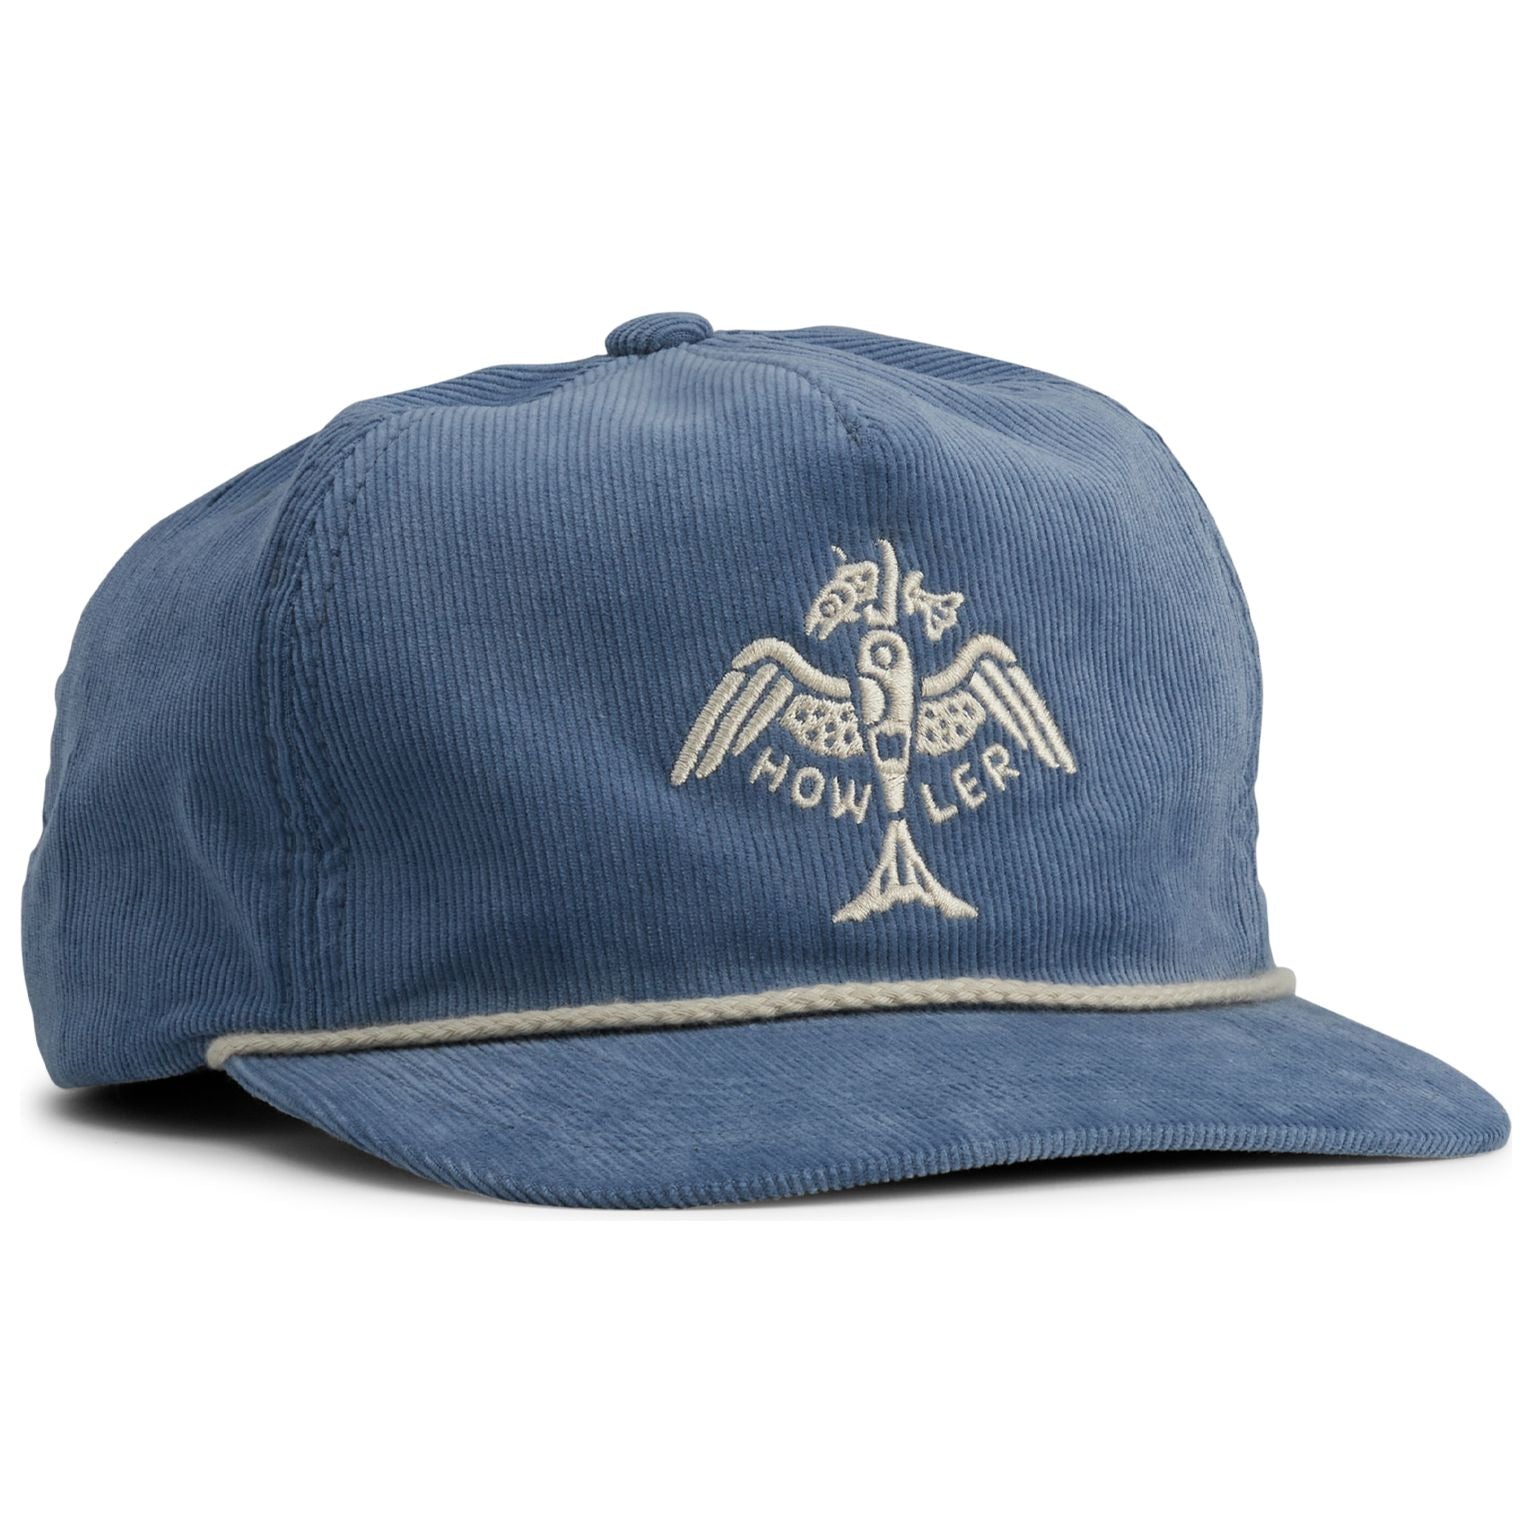 Howler Brothers Unstructured Snapback Hats: Fresh Catch : Wale Cord Image 01